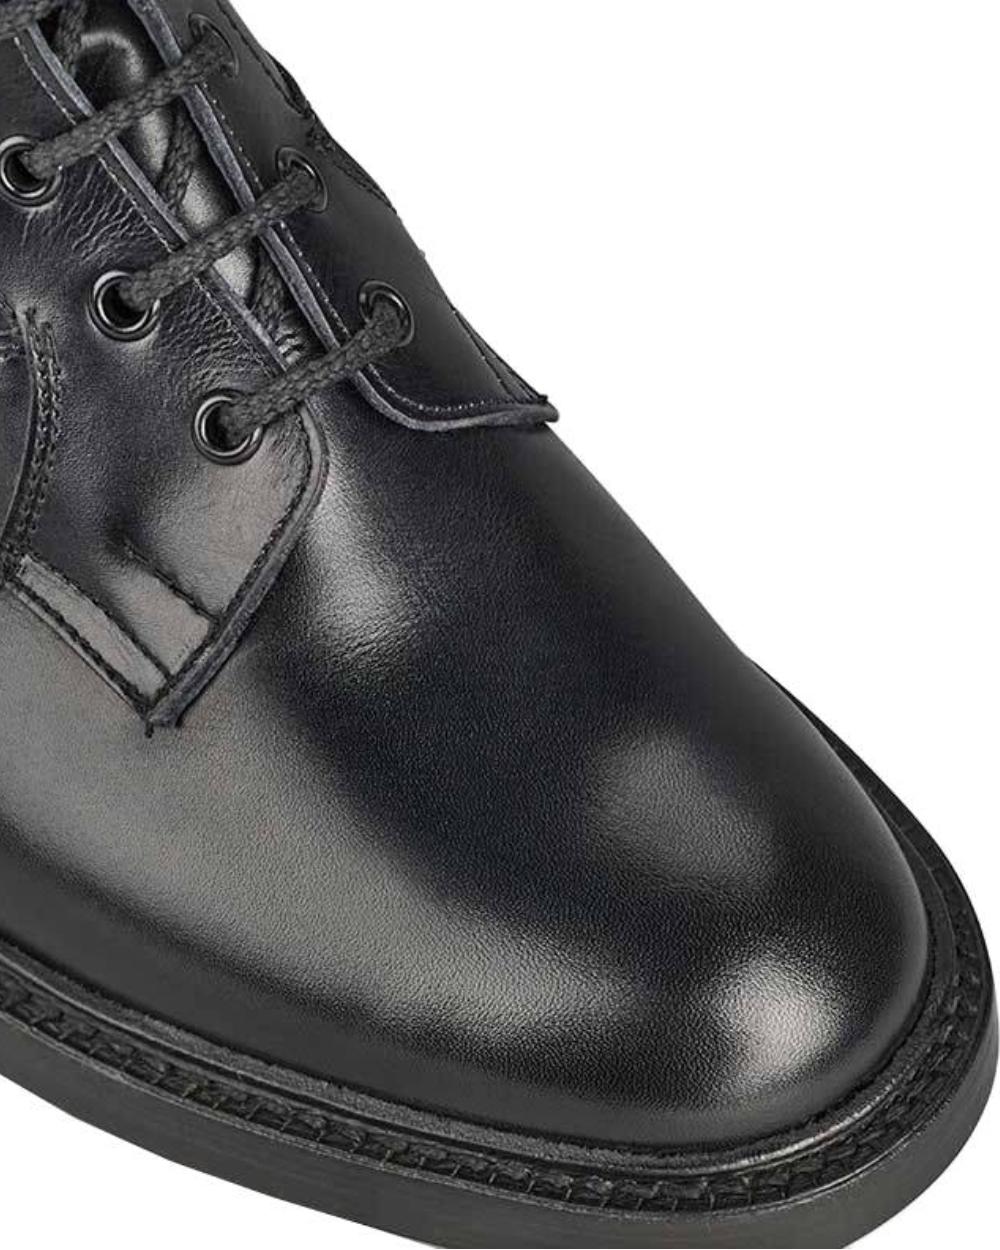 Black Calf Coloured Trickers Burford Country Boot Dainite Sole On A White Background 